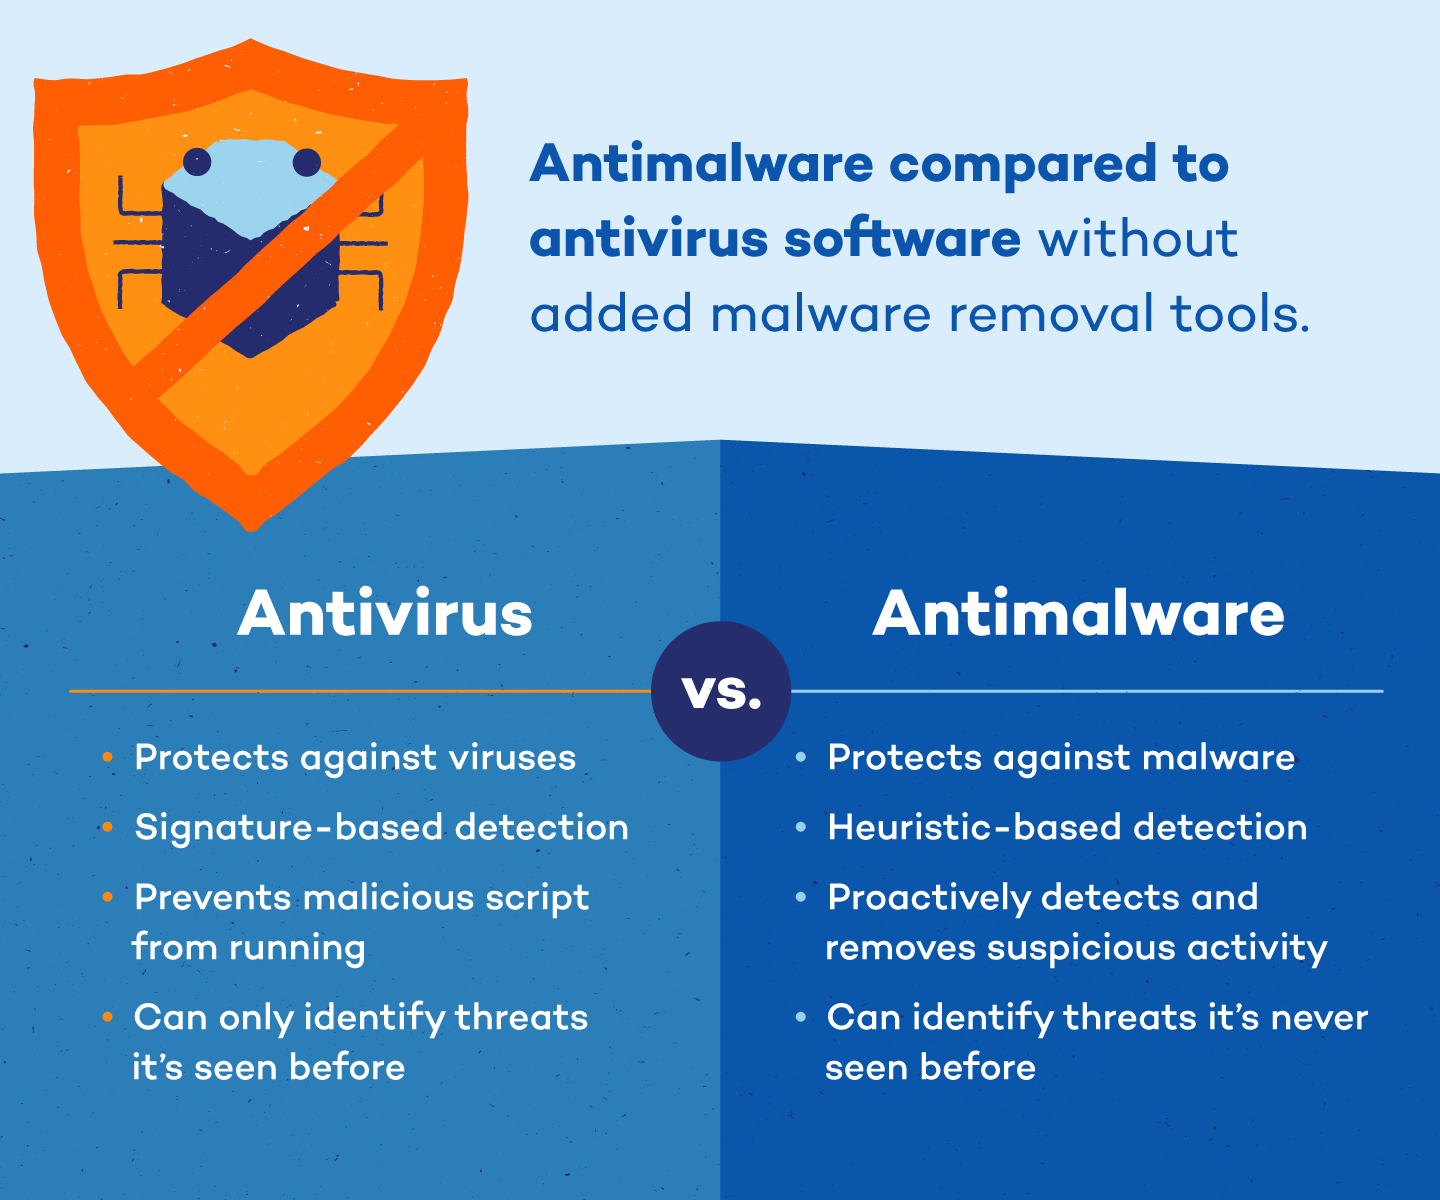 Use a reliable antivirus or antimalware software to perform a thorough system scan.
Follow the instructions provided by the software to remove any detected malware or viruses.